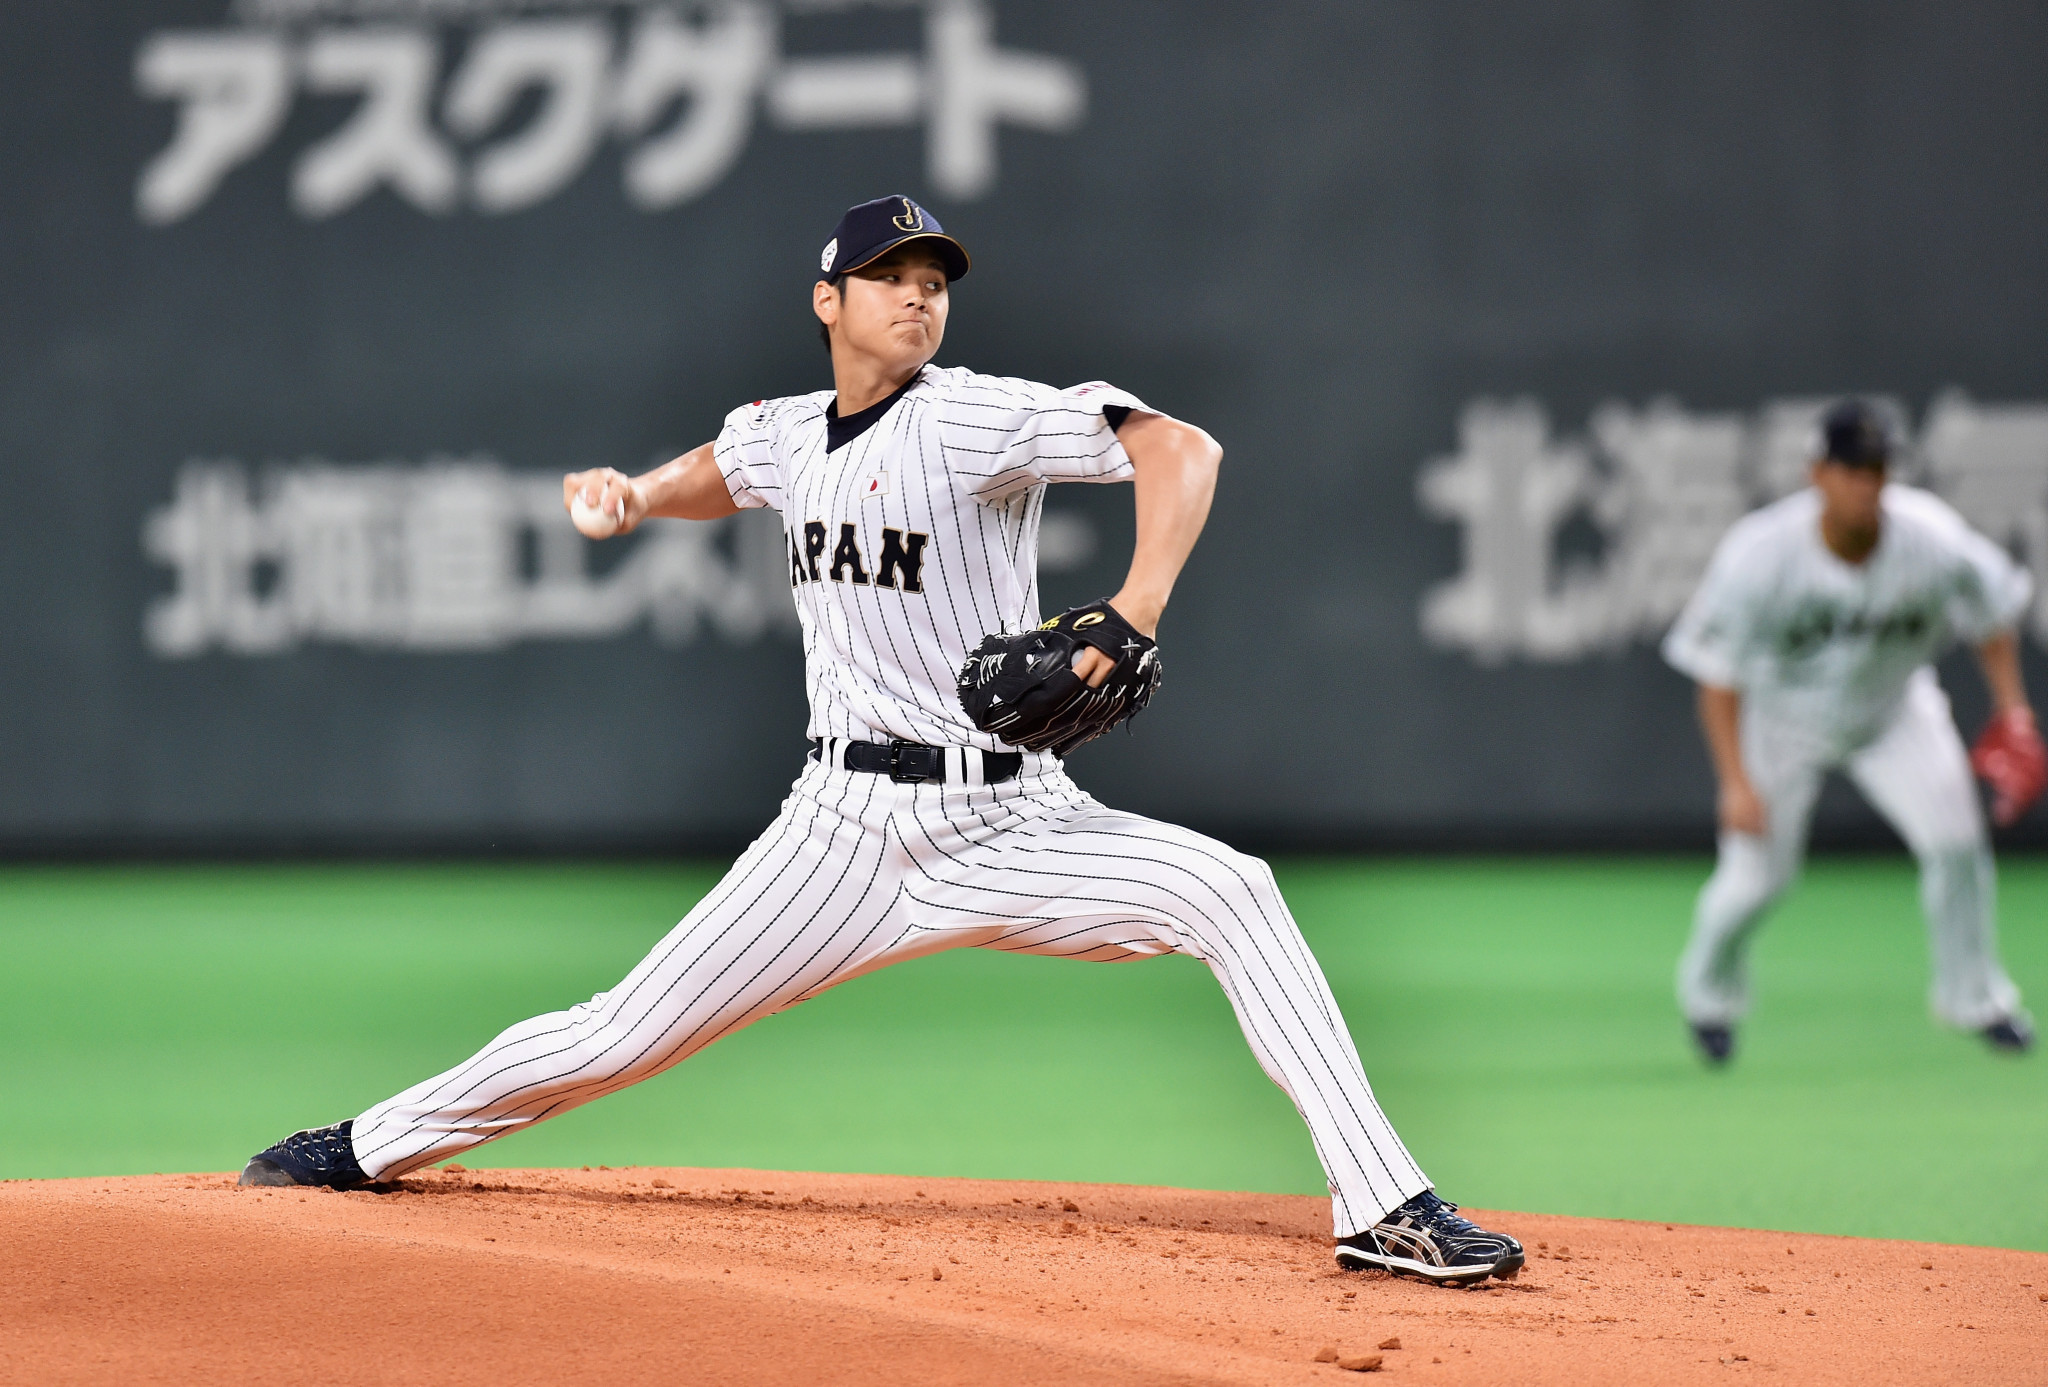 Shohei Ohtani won the award for the best pitcher at the 2015 WBSC Premier12 event ©Getty Images